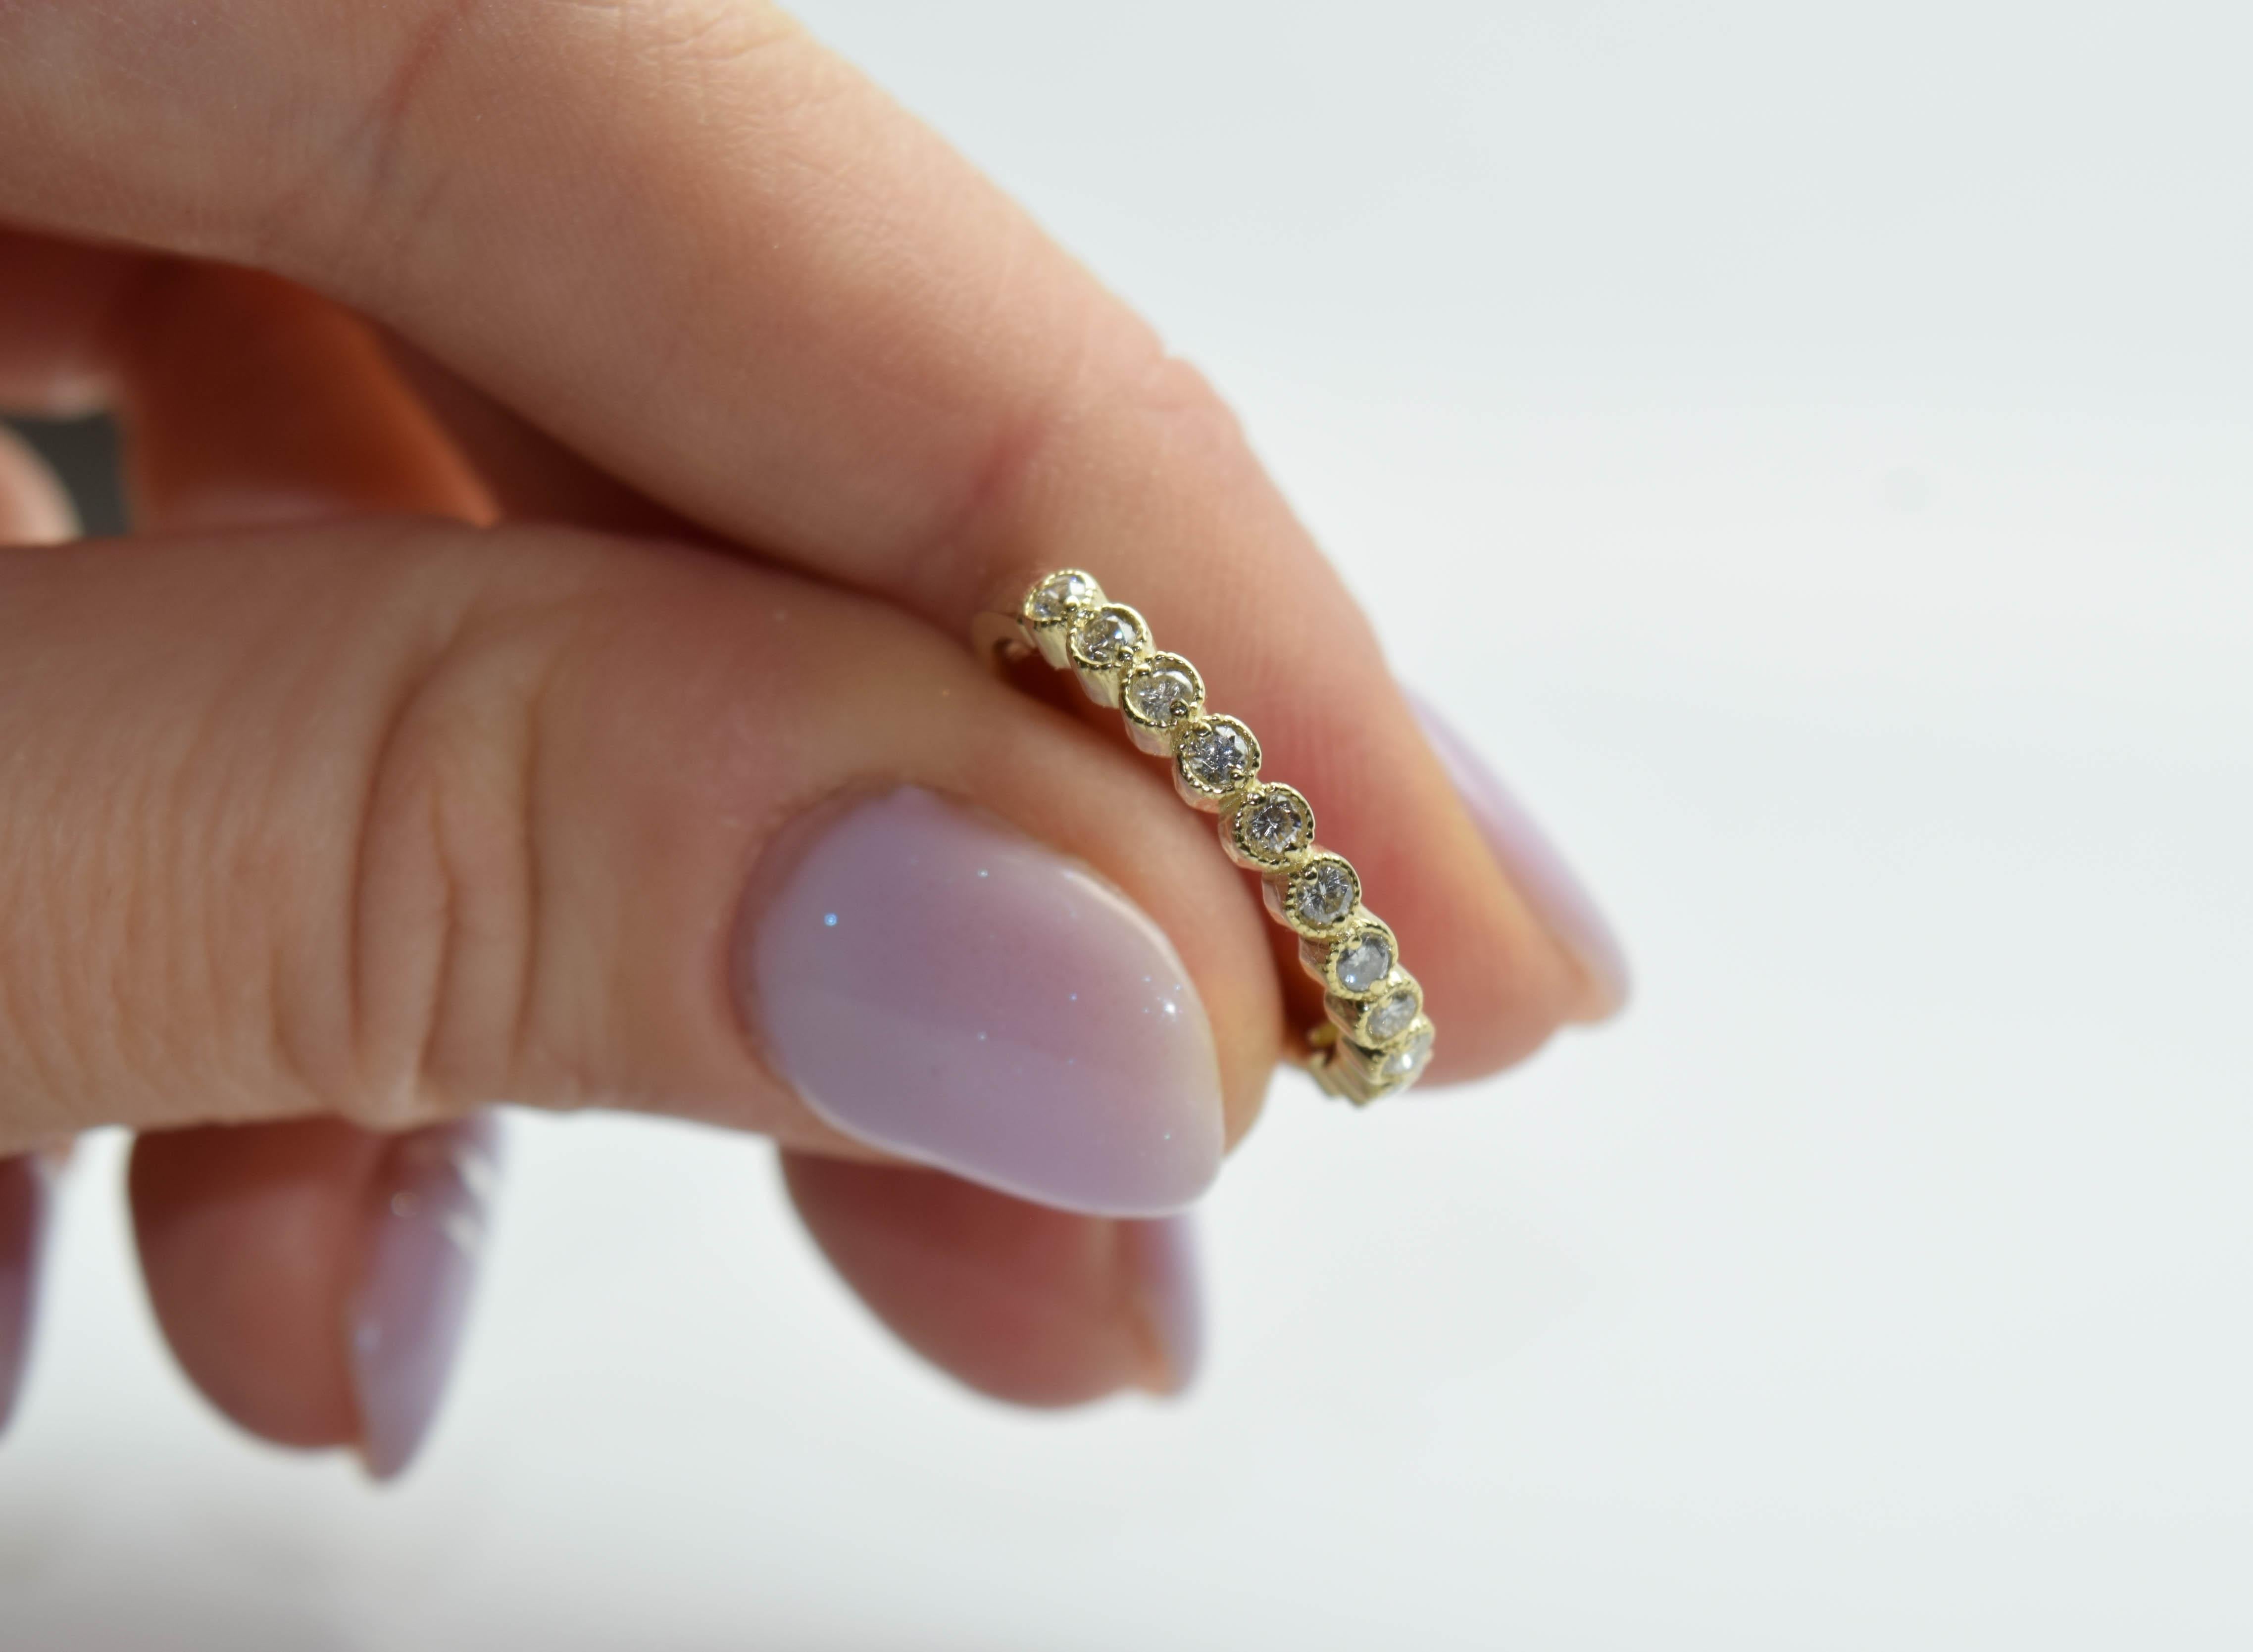 Beautiful simple diamond ring made with 12 diamonds in 10KT yellow gold, hand finished with tiny milgrain balls around each bezel which gives the ring a vintage feel and look.

Metal Type: 10KT
Natural Side Diamond(s):
Color: G-H
Cut:Round